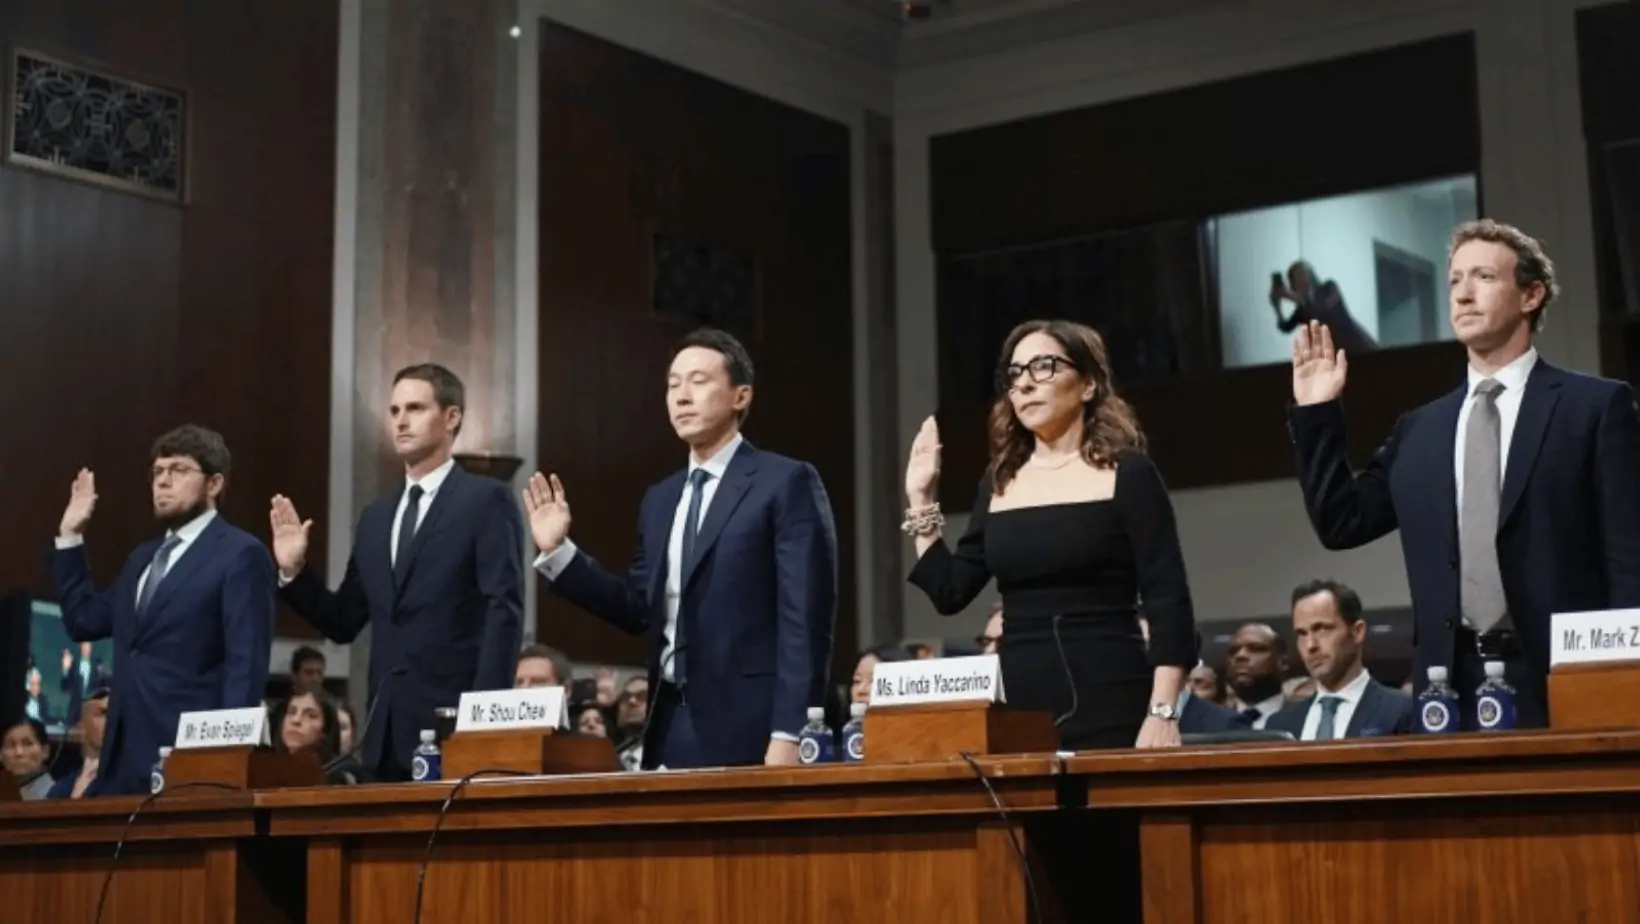 Tech CEOs Grilled in Senate Hearing on Child Safety